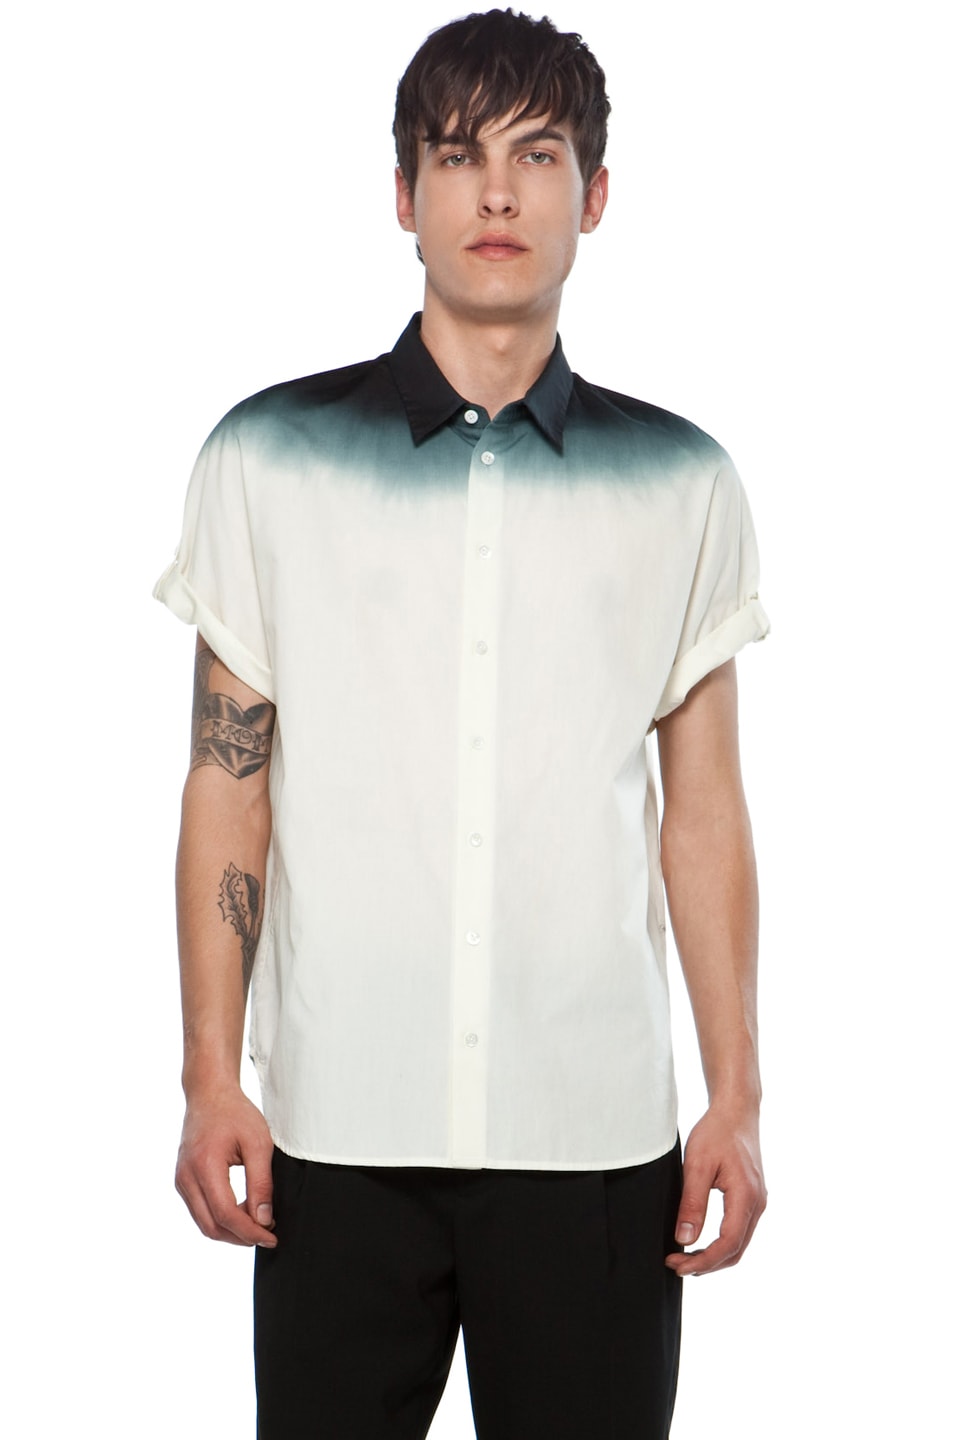 Image 1 of 3.1 phillip lim Dolman Button Up with Dip Dye Gradient in Ivory & Soft Black